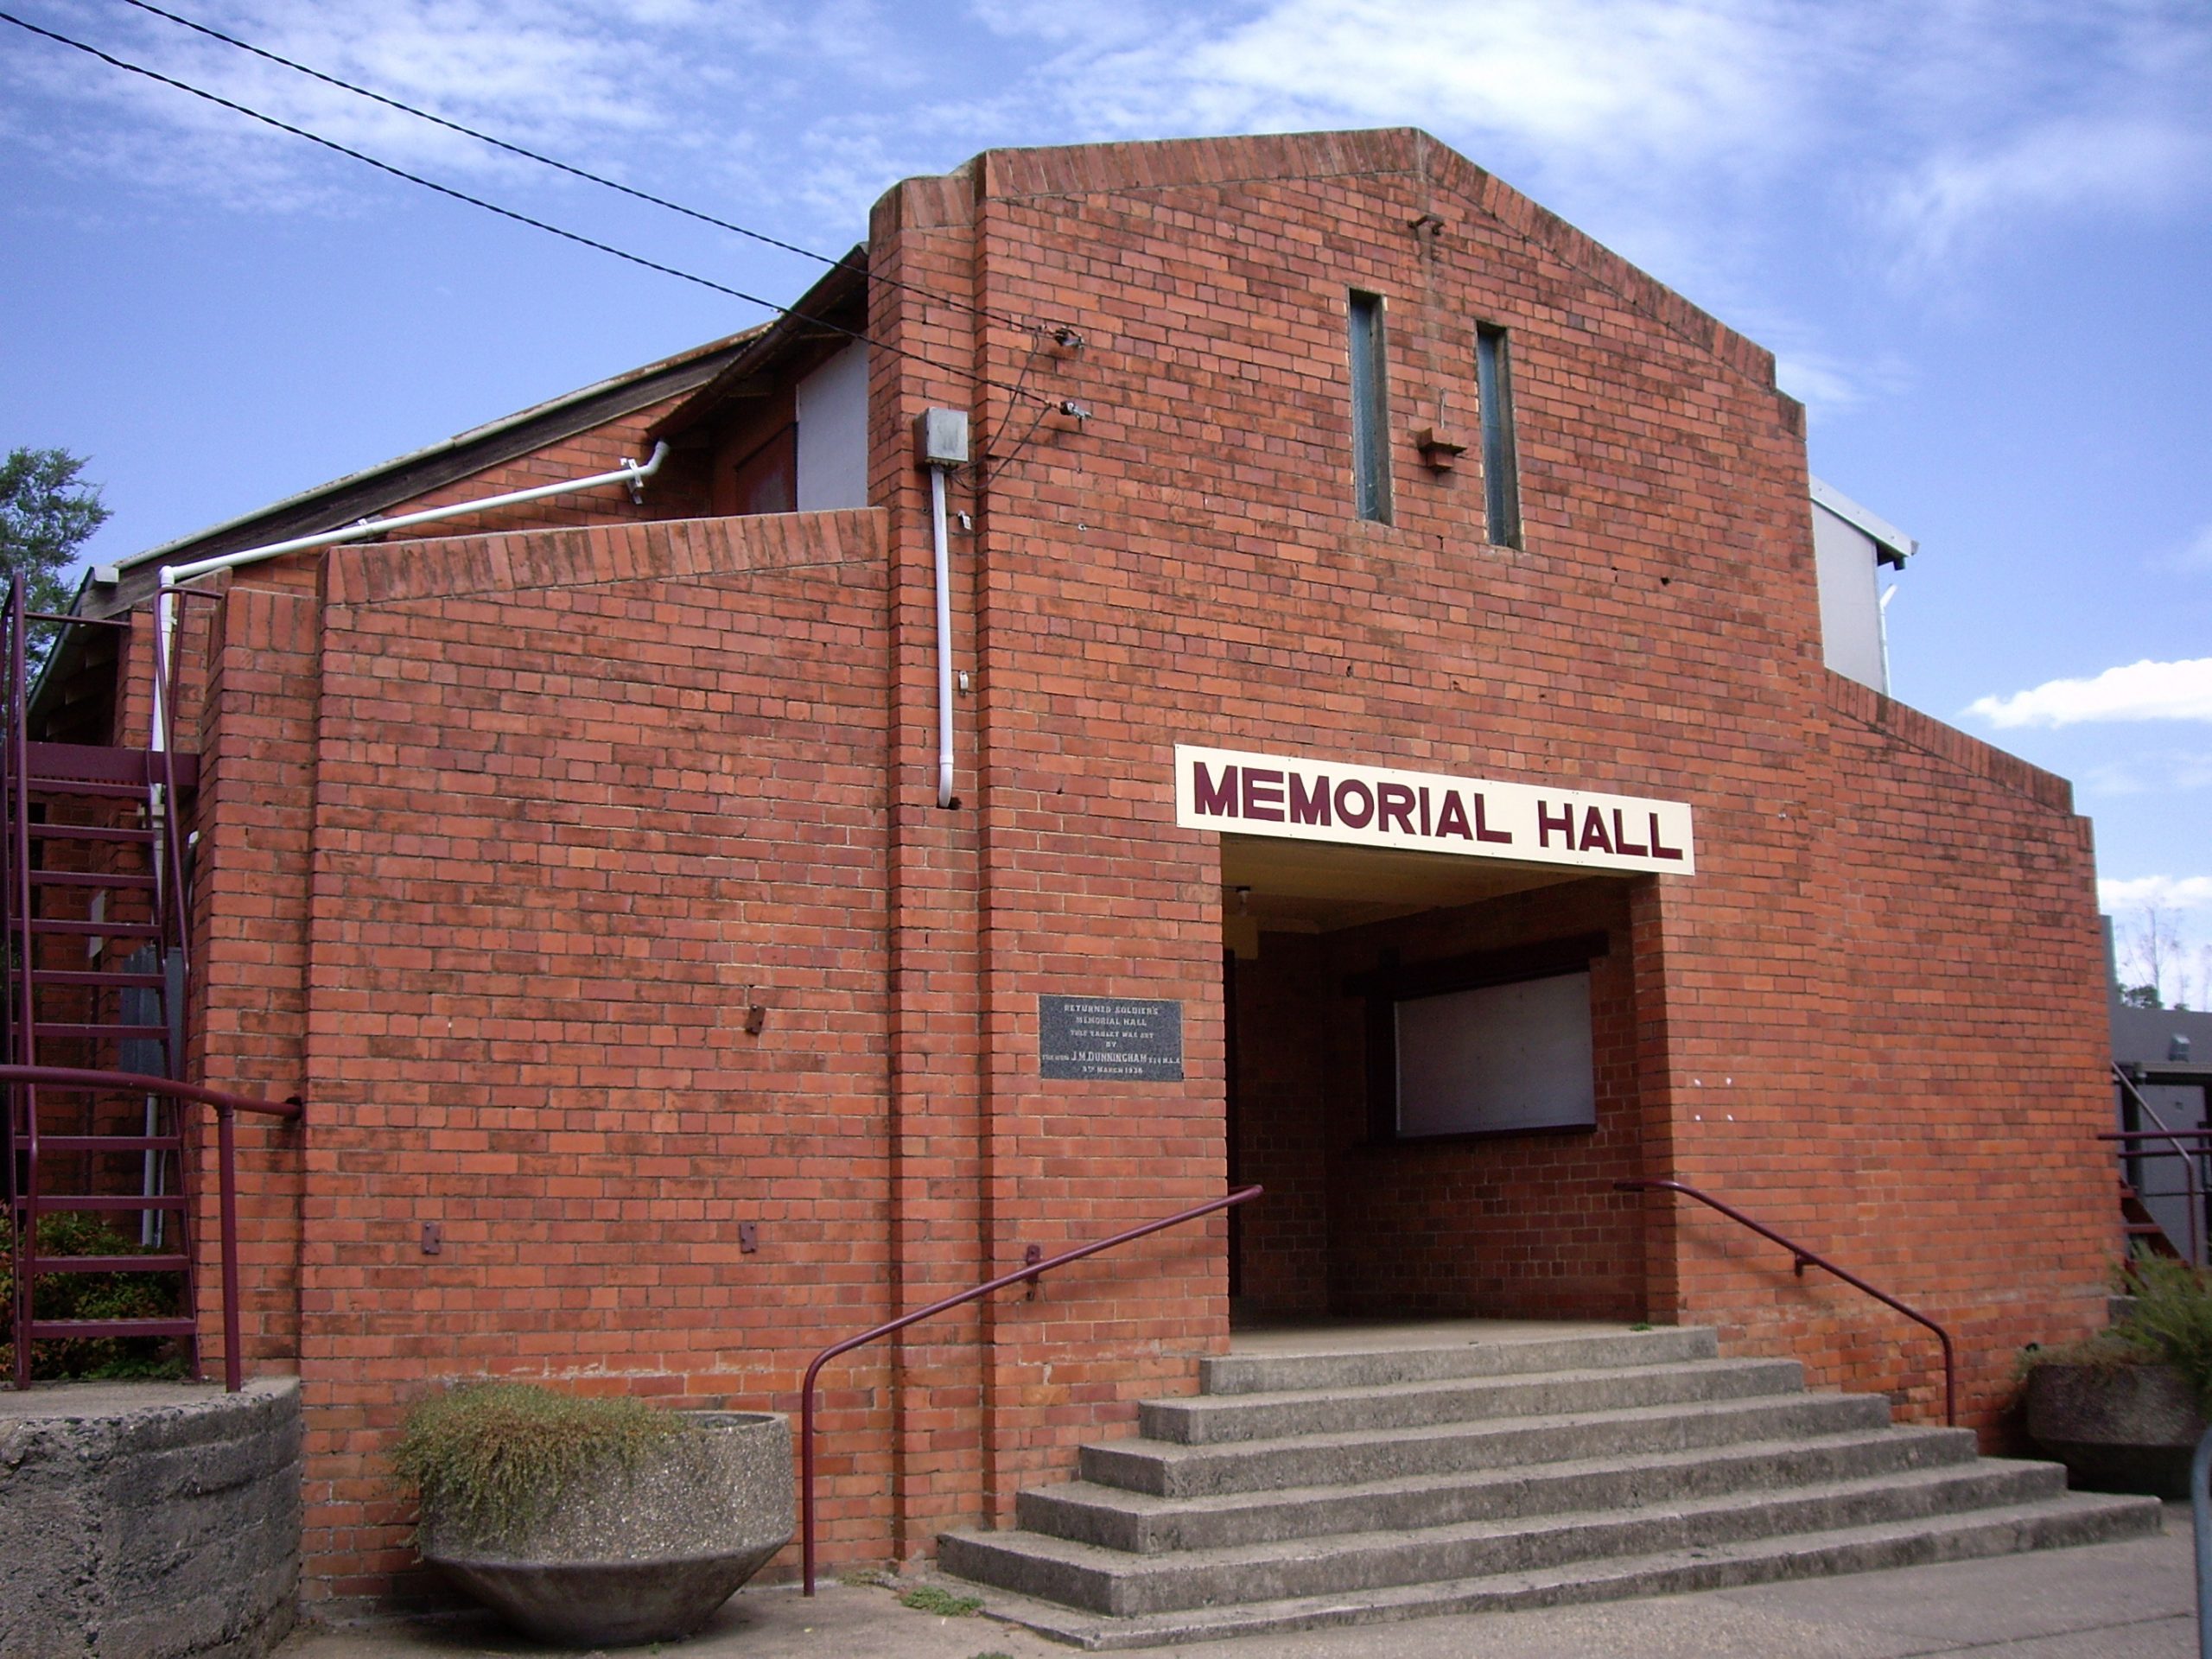 Photo of Tumbarumba Memorial Hall, which is a large red brick building.